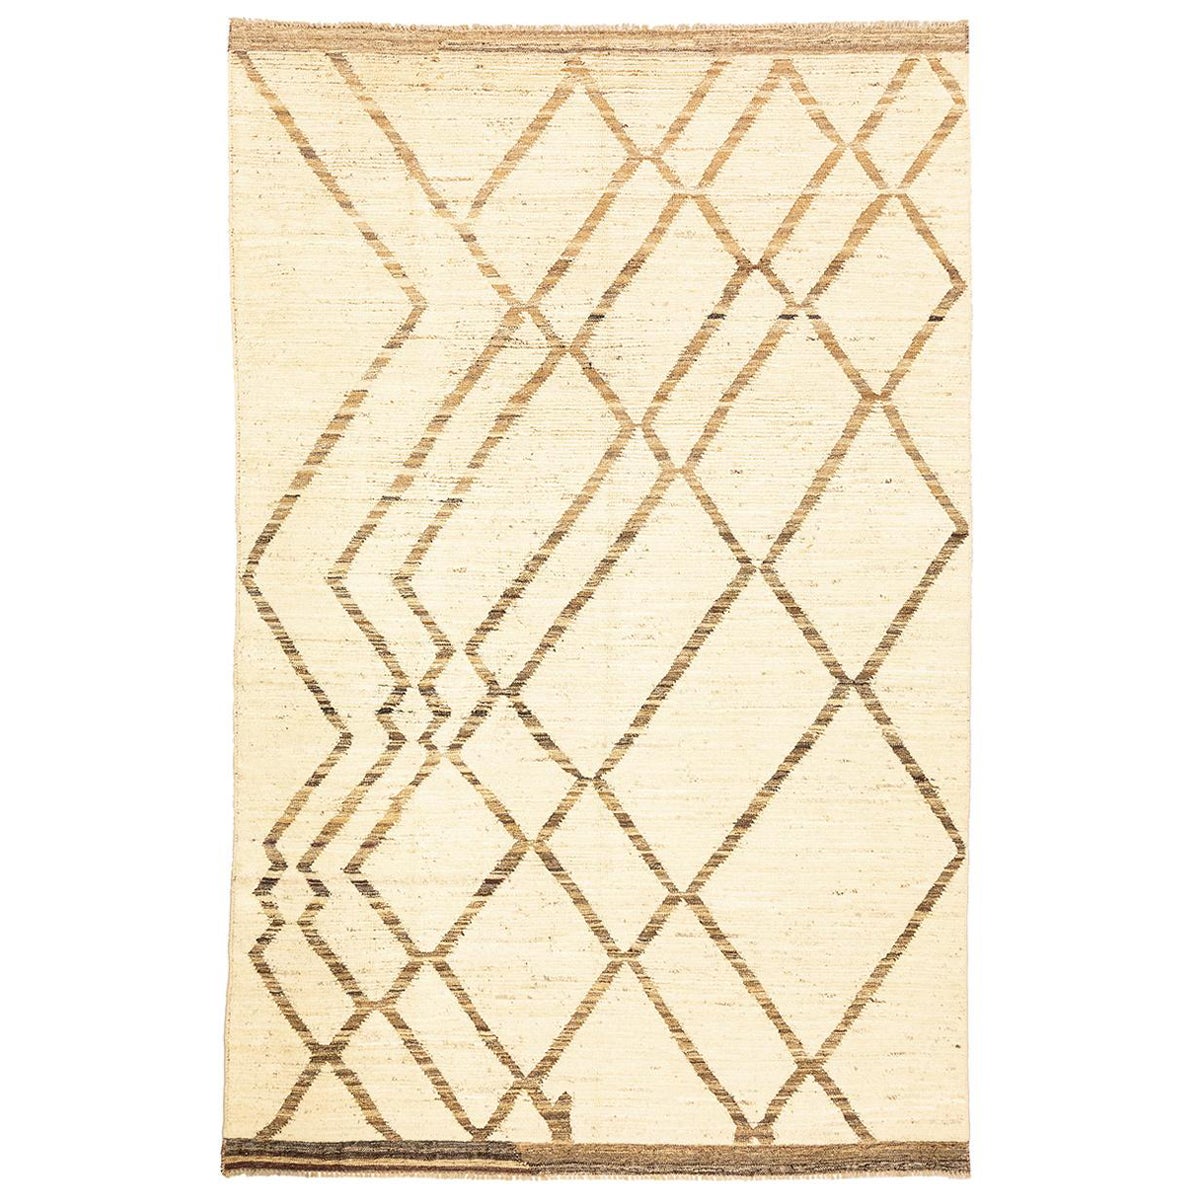 Beni Ourain Moroccan Rug Beige Color For Sale